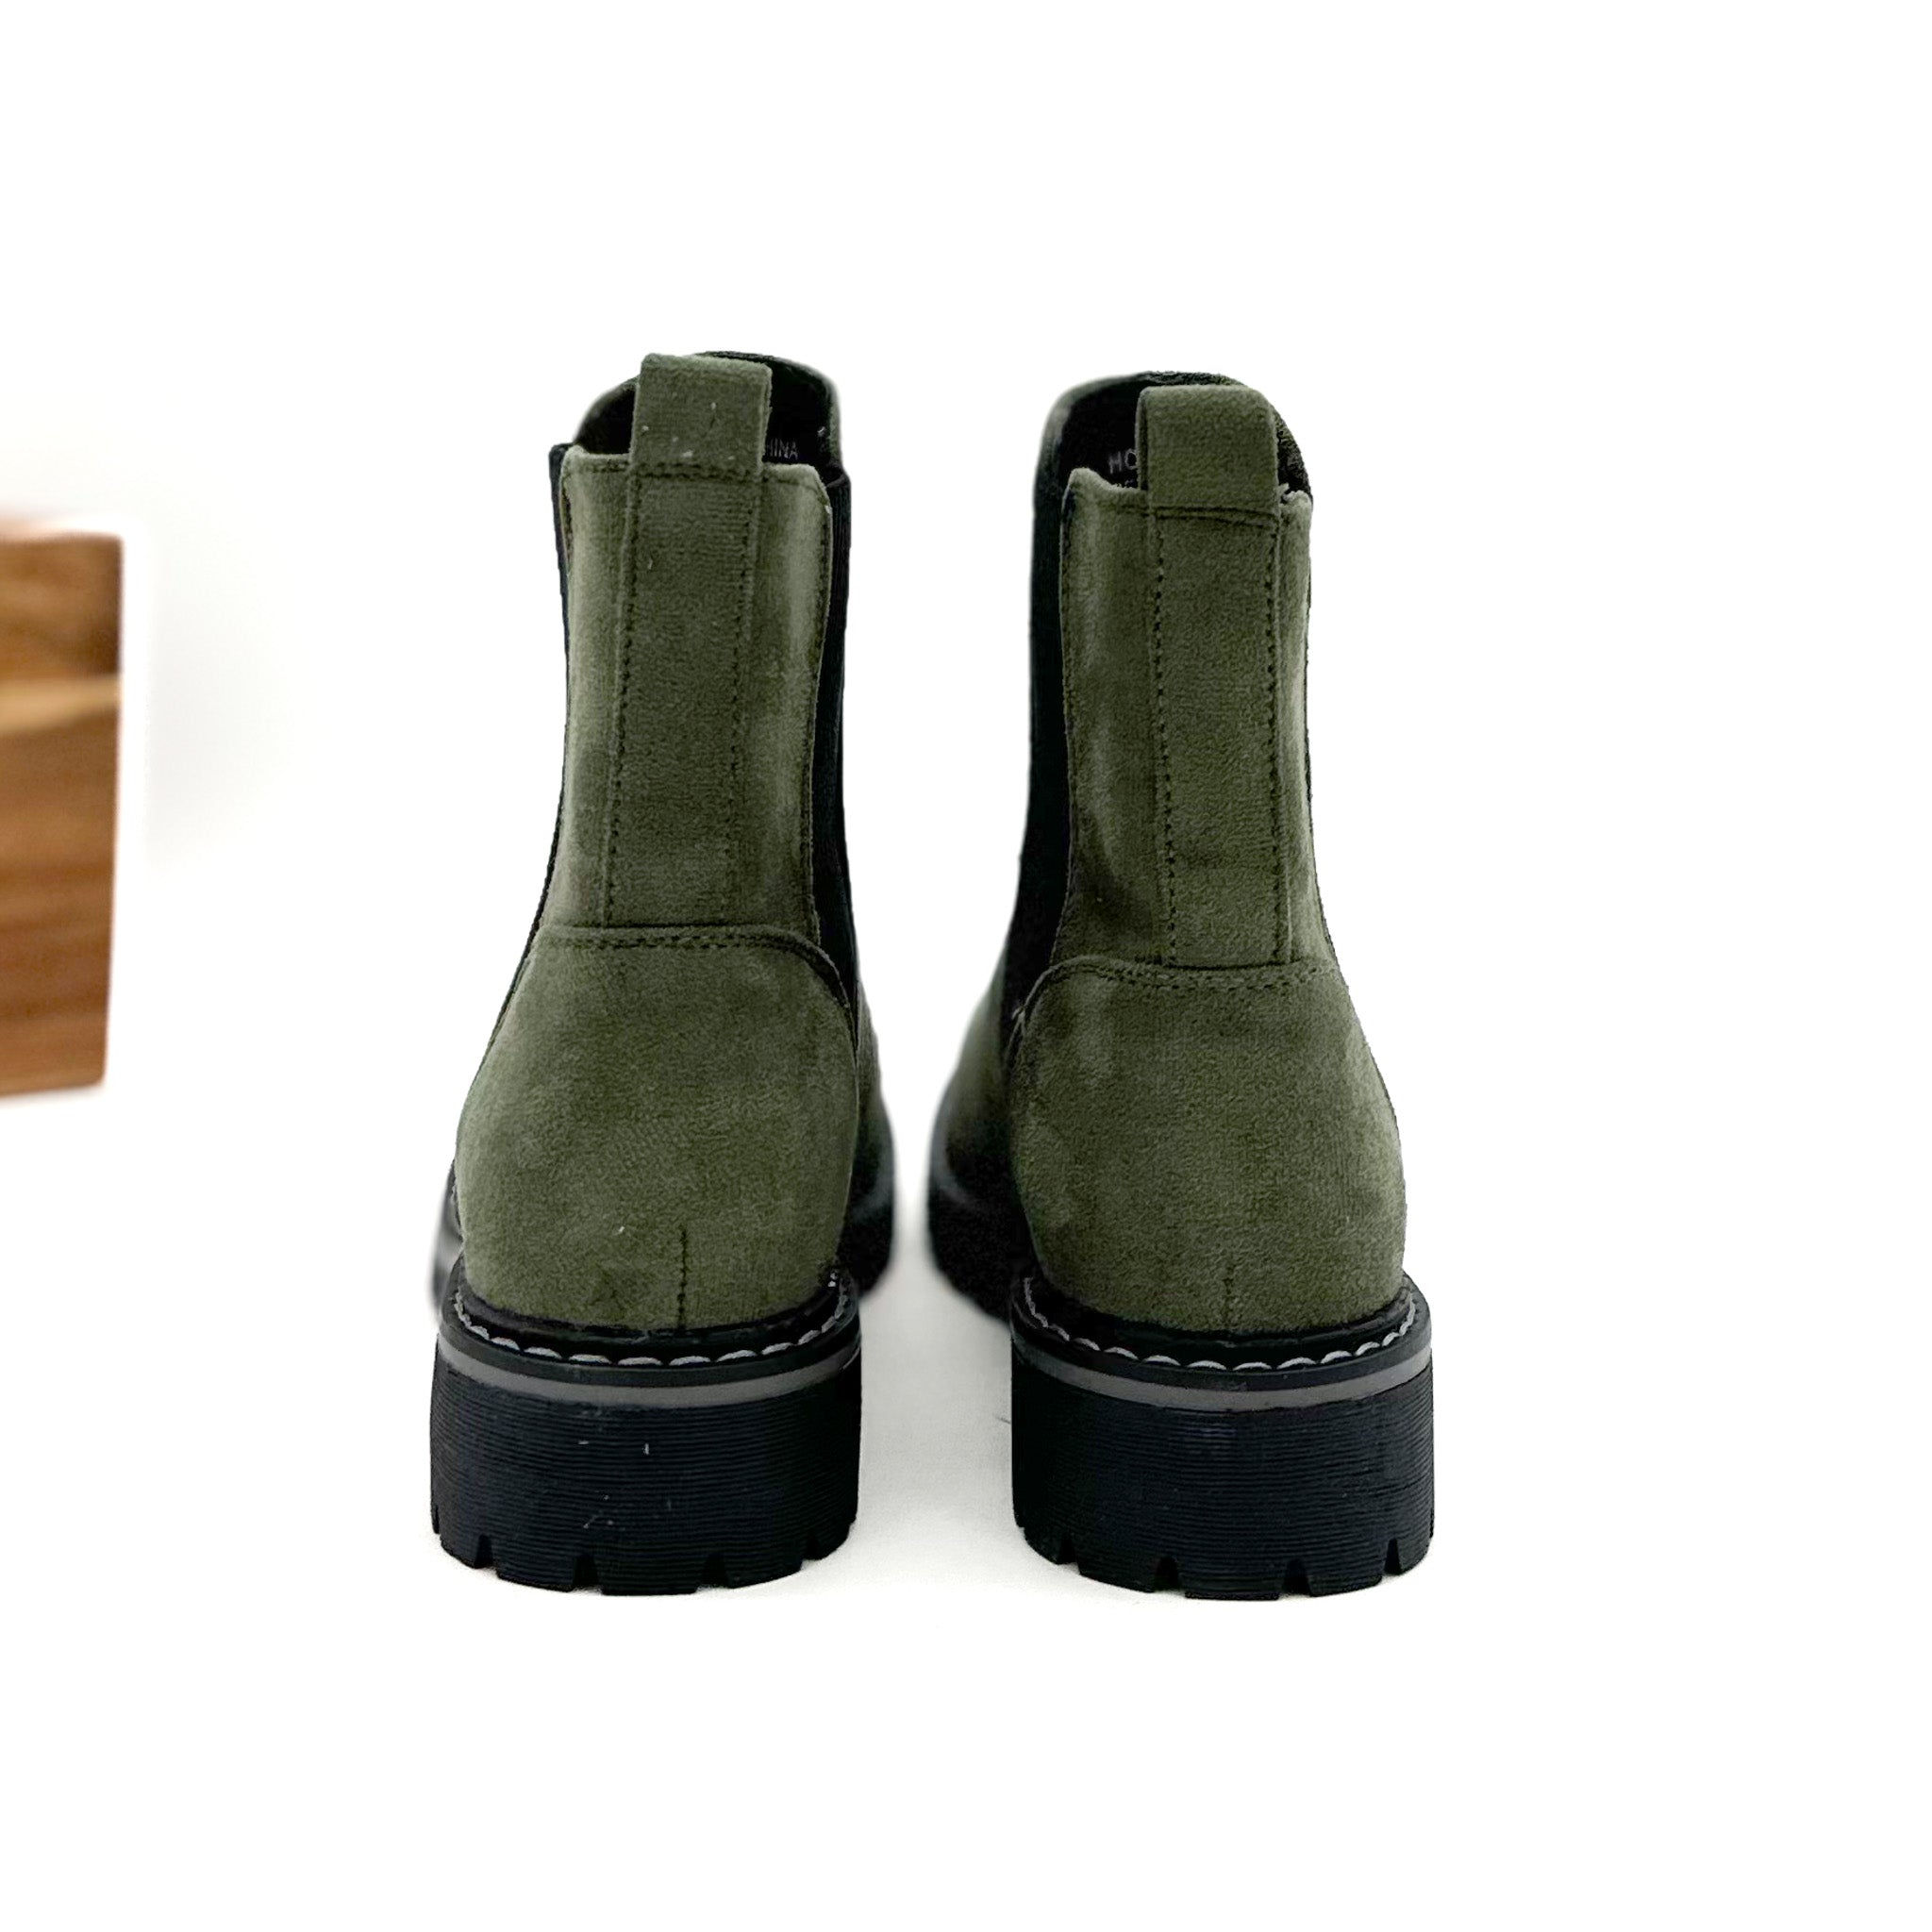 Howl Ankle Boots in Dark Green Suede